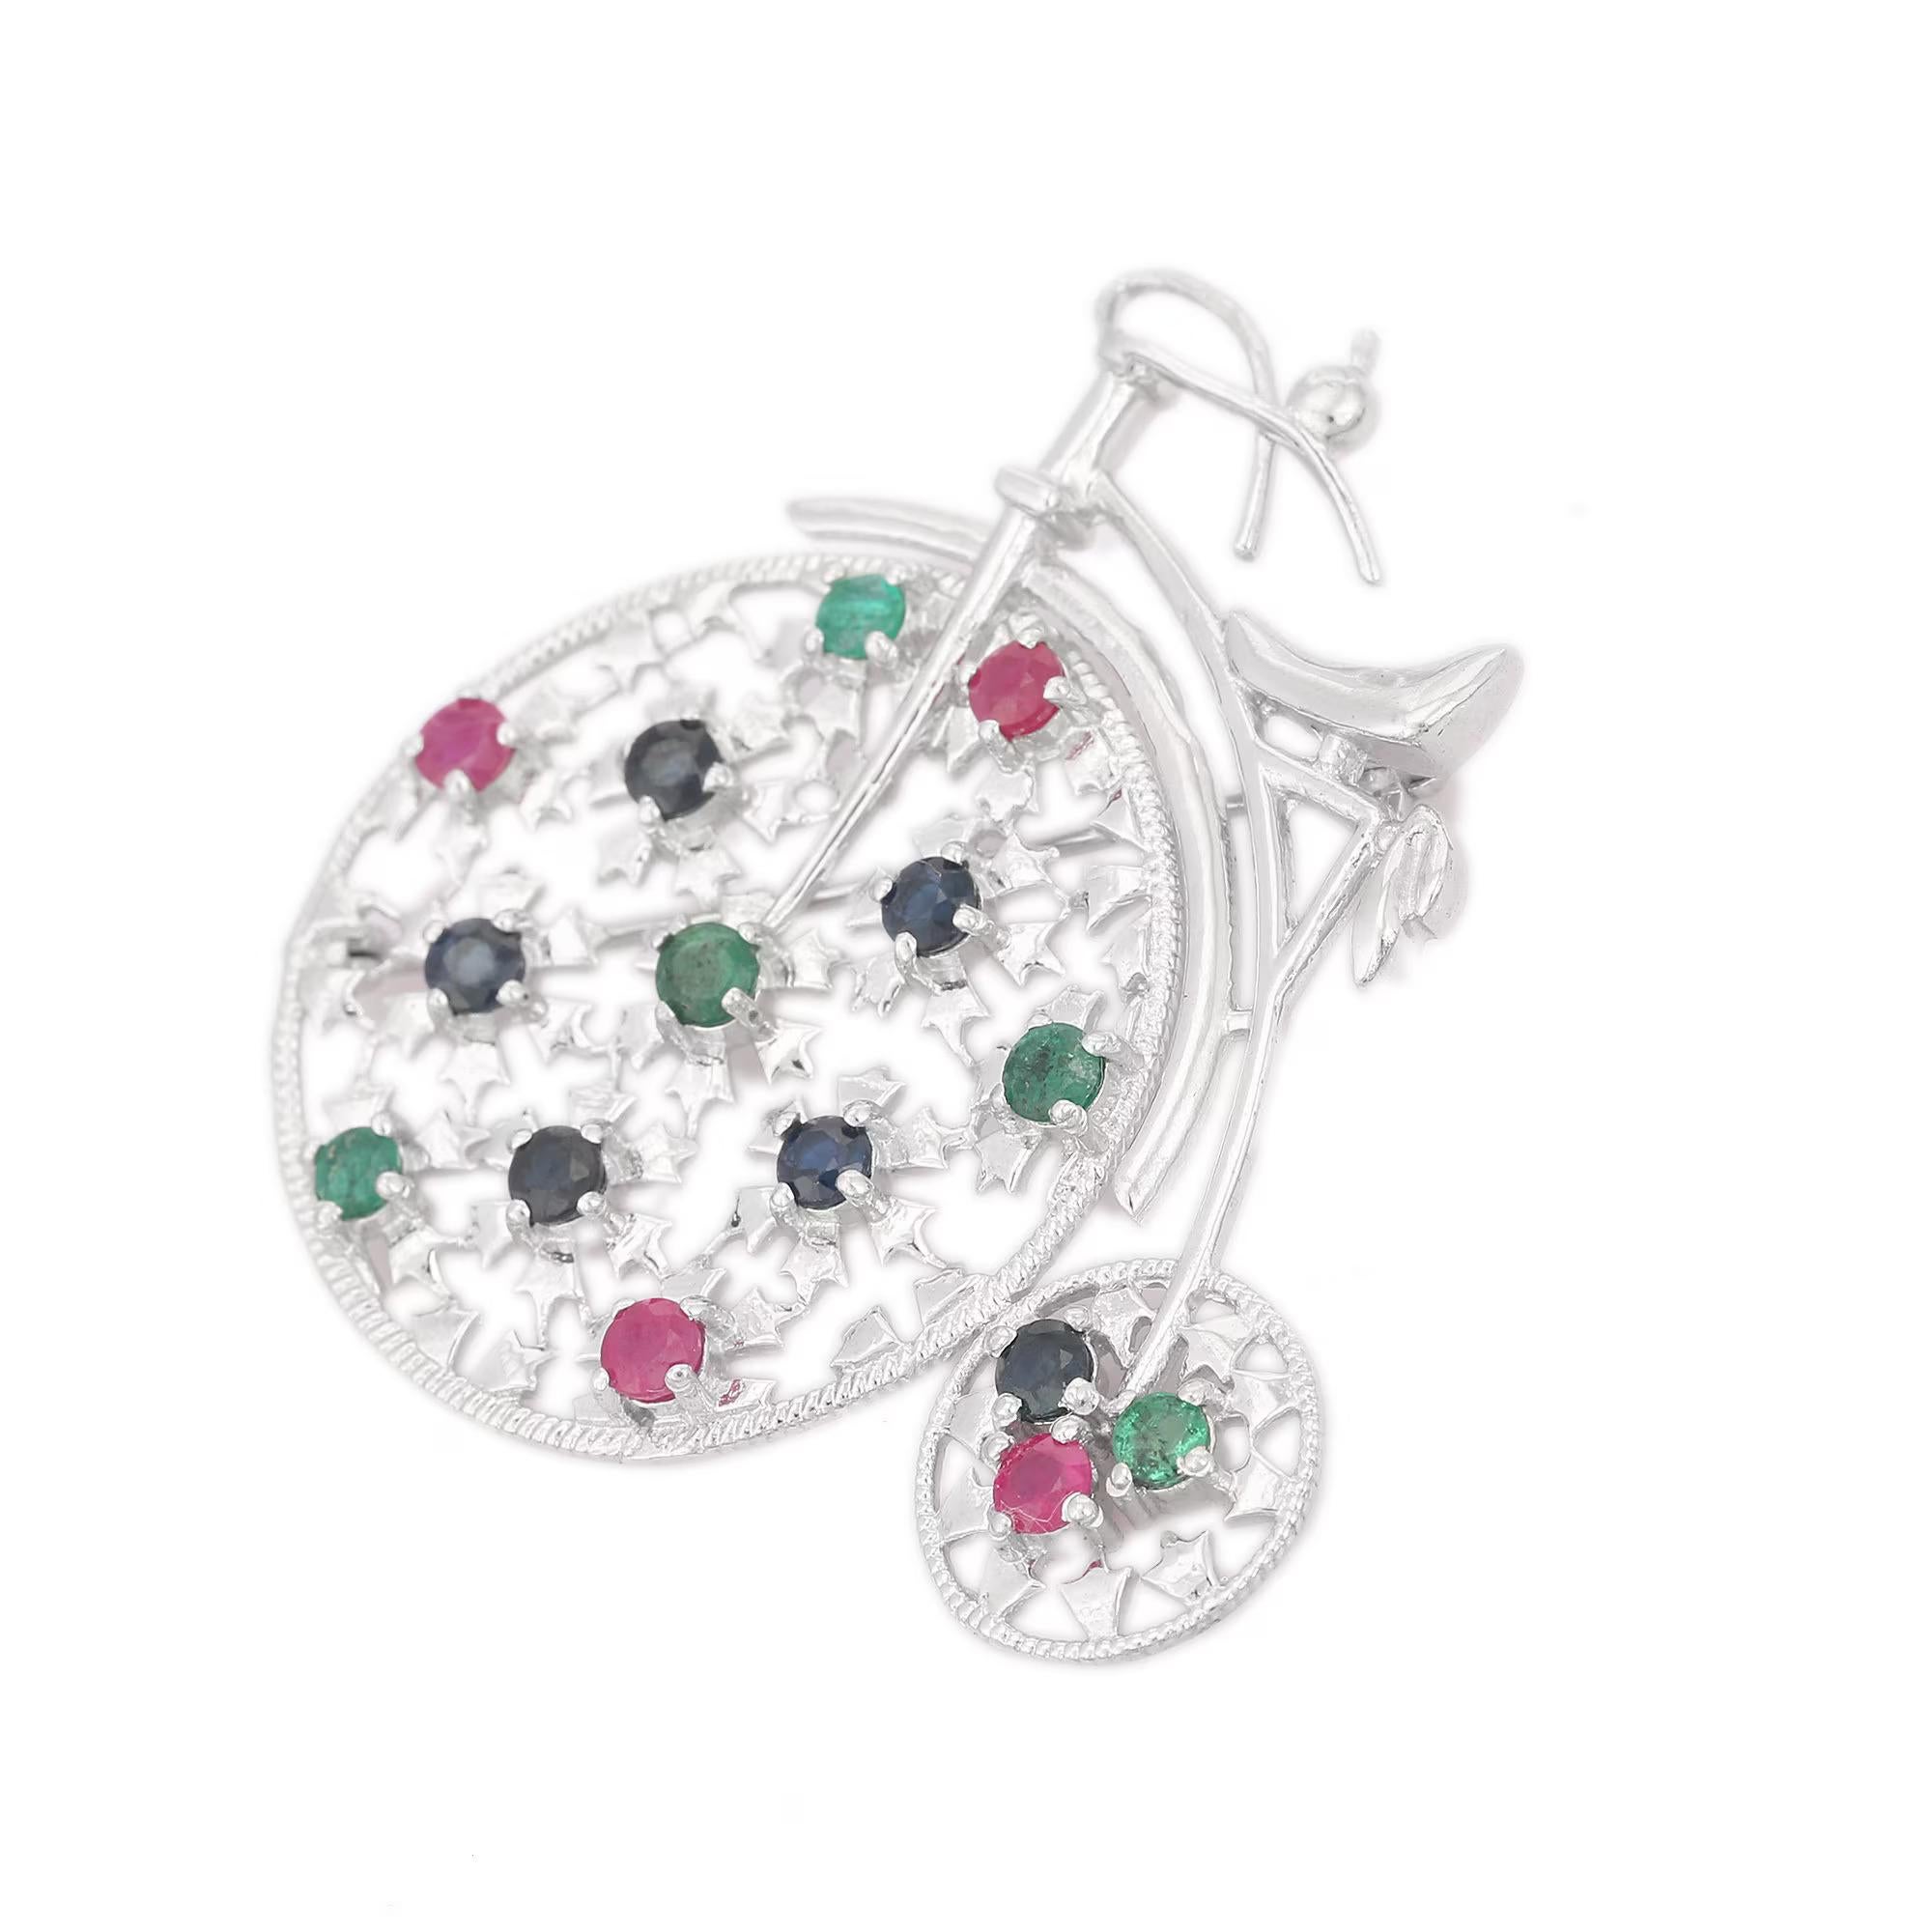 This Emerald Ruby Sapphire Multi Gemstone Bicycle Brooch enhances your attire and is perfect for adding a touch of elegance and charm to any outfit. Crafted with exquisite craftsmanship and adorned with dazzling emerald, ruby and sapphire where ruby